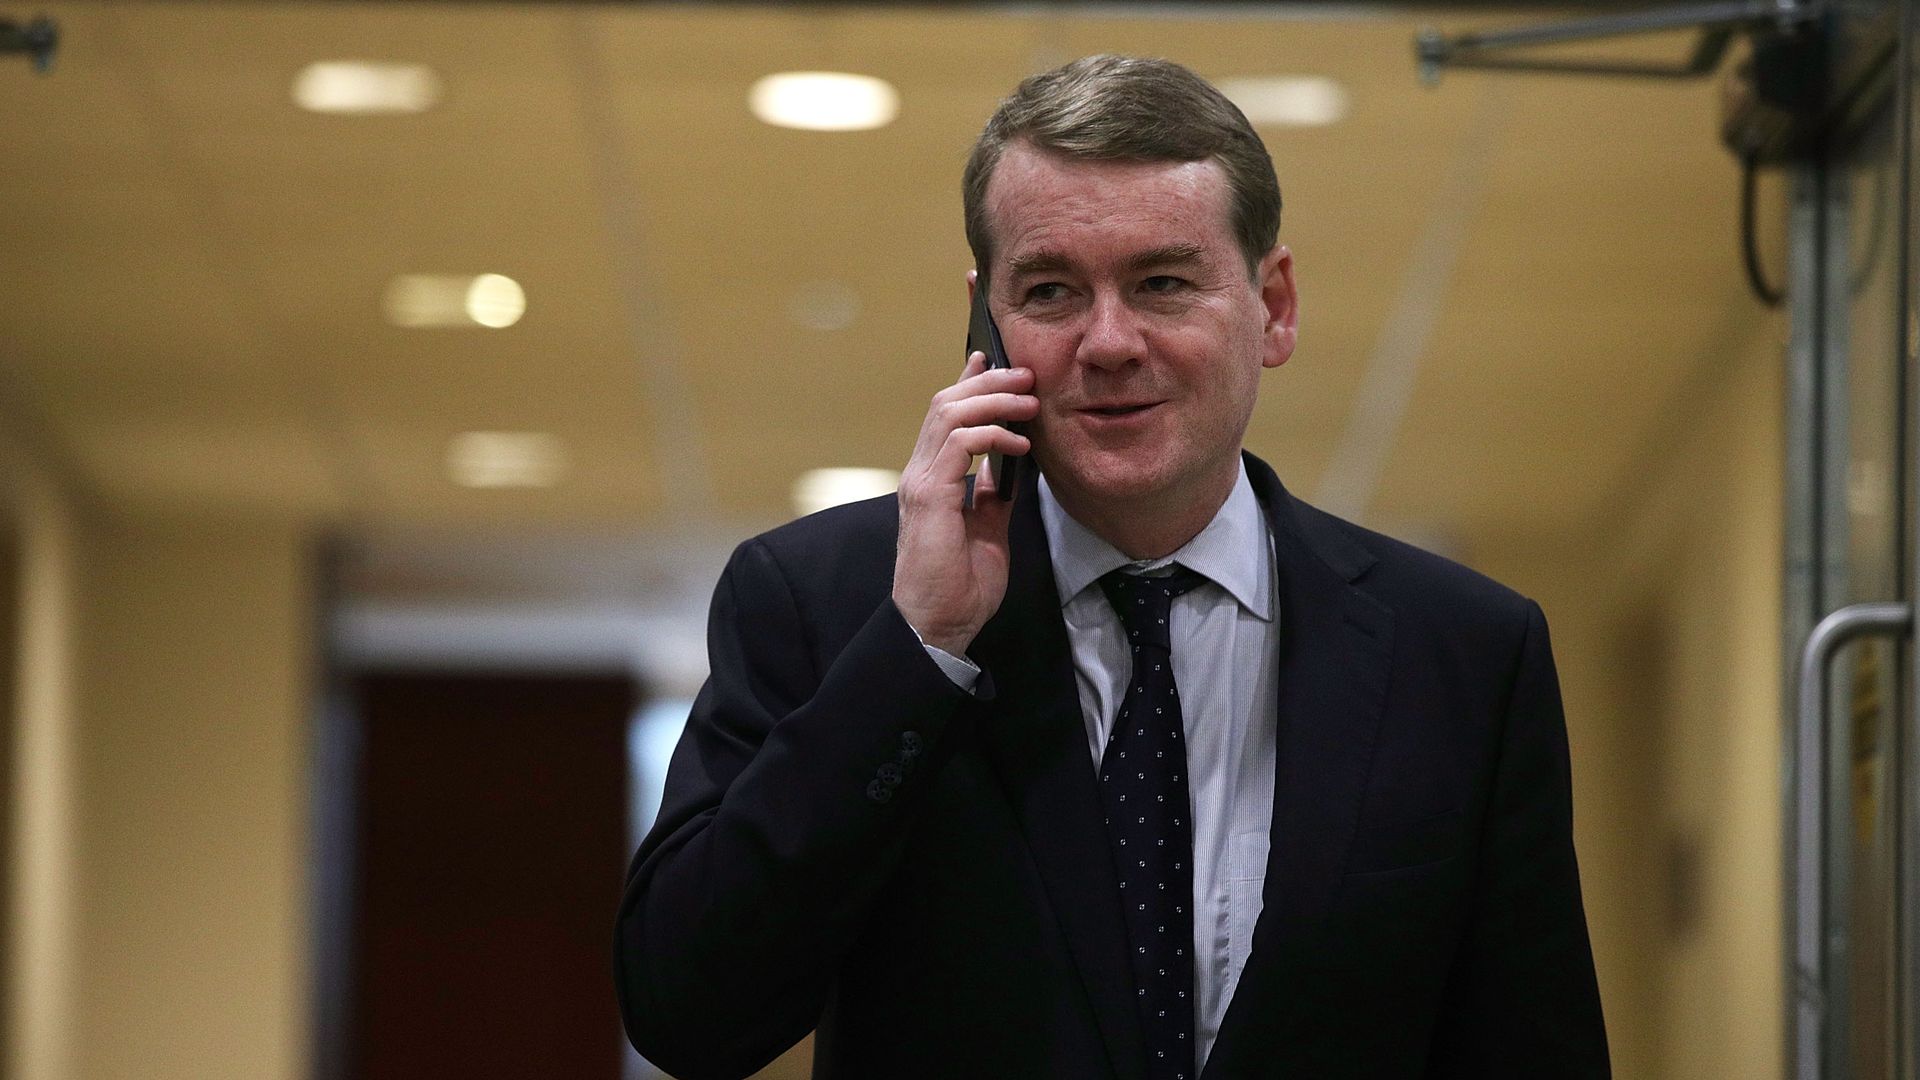 Michael Bennet says he has prostate cancer, but he still intends to run for president.